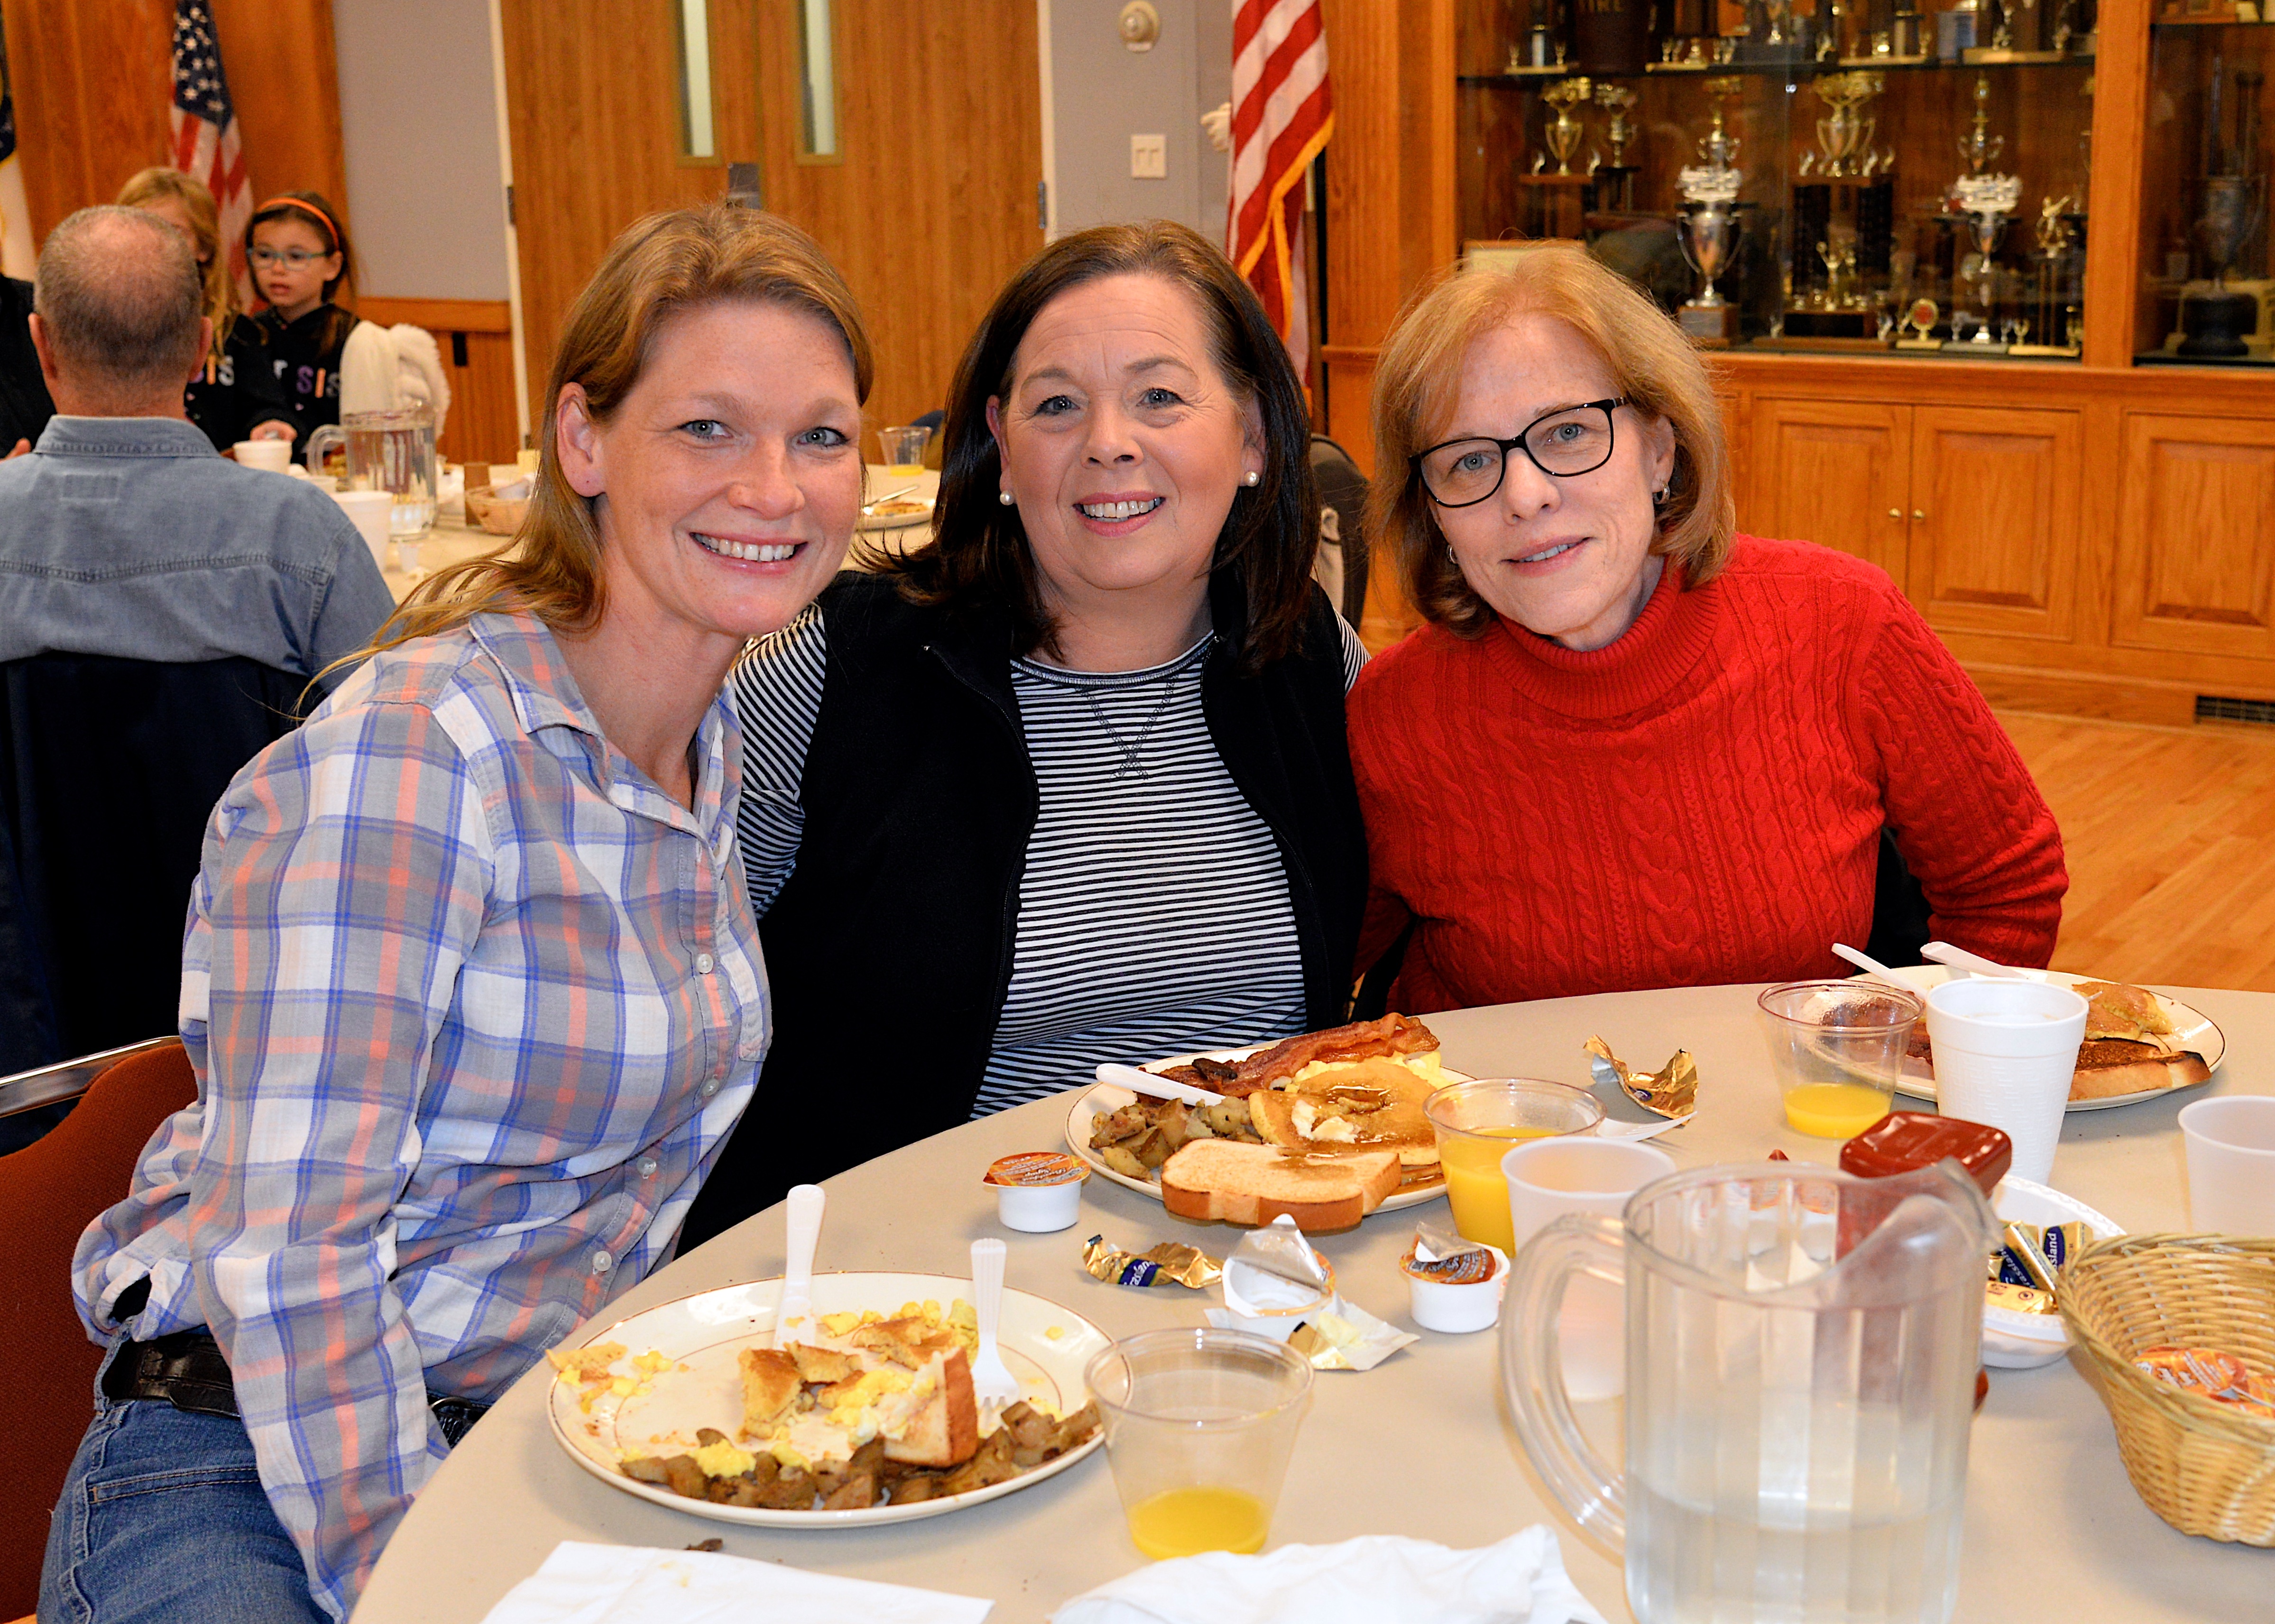 The East Hampton Fire Department hosted a pancake breakfast on Sunday, raising funds for the Eleanor Whitmore Early Childhood Center. From left, Erin Abran, Alison Anderson and Barbara Bock turned out to support the effort. KYRIL BROMLEY 